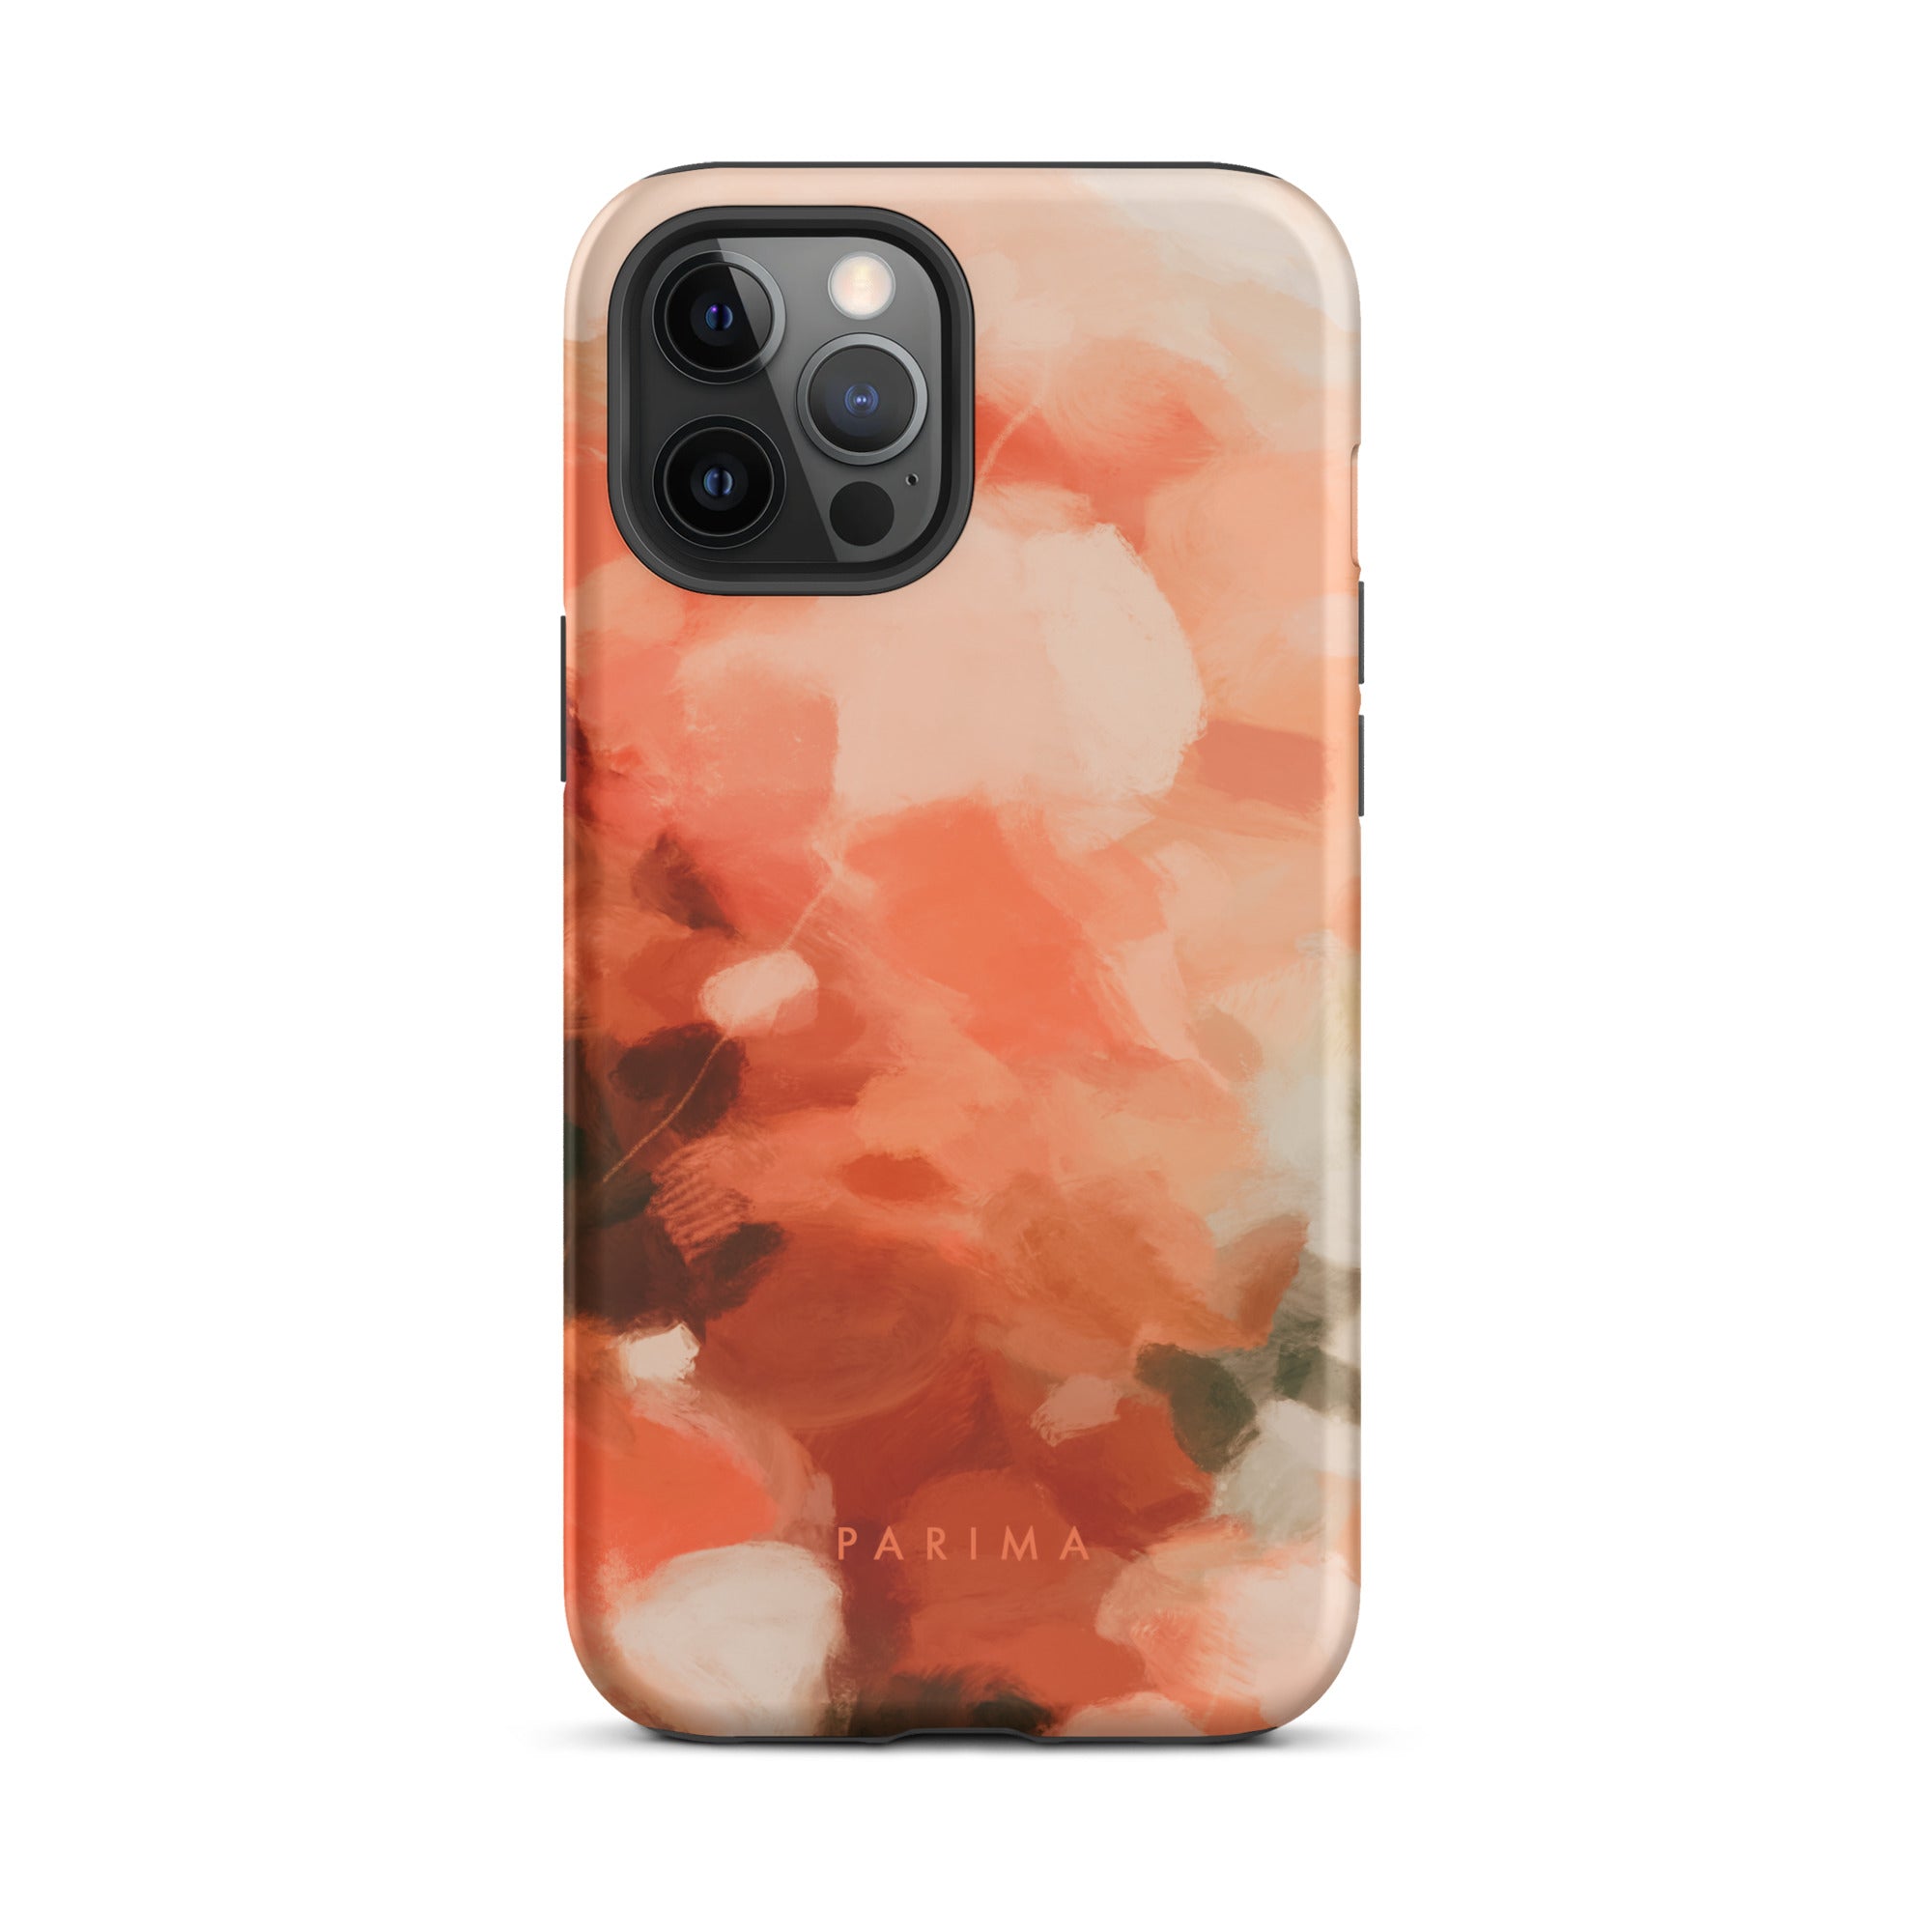 Sweet Nectar, orange and pink abstract art - iPhone 12 Pro Max tough case by Parima Studio